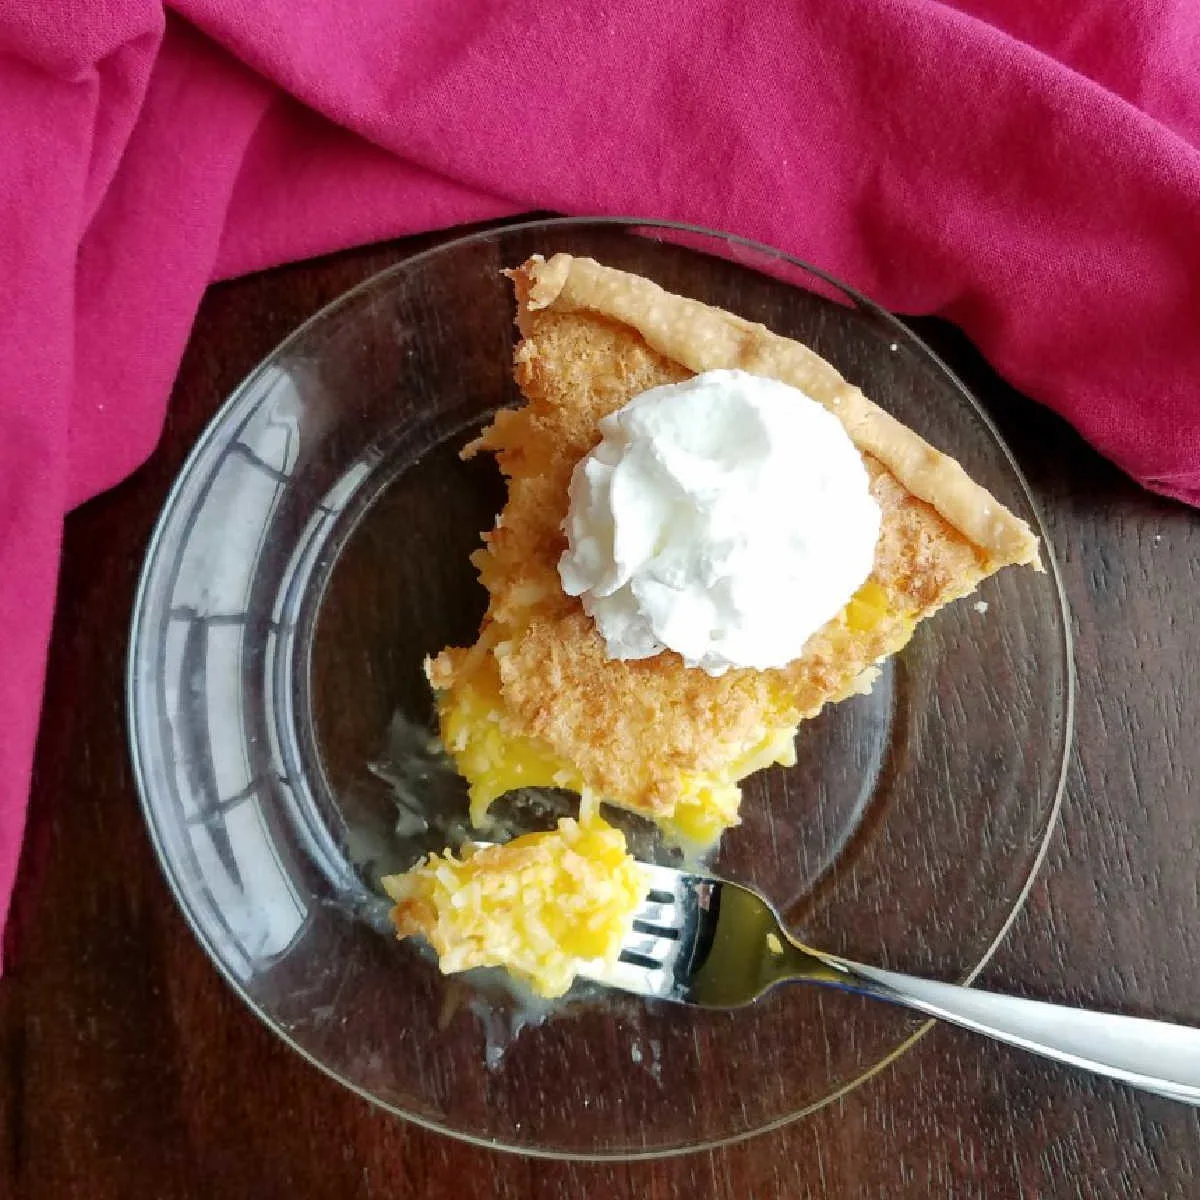 slice of coconut and pineapple pie with whipped cream on top.